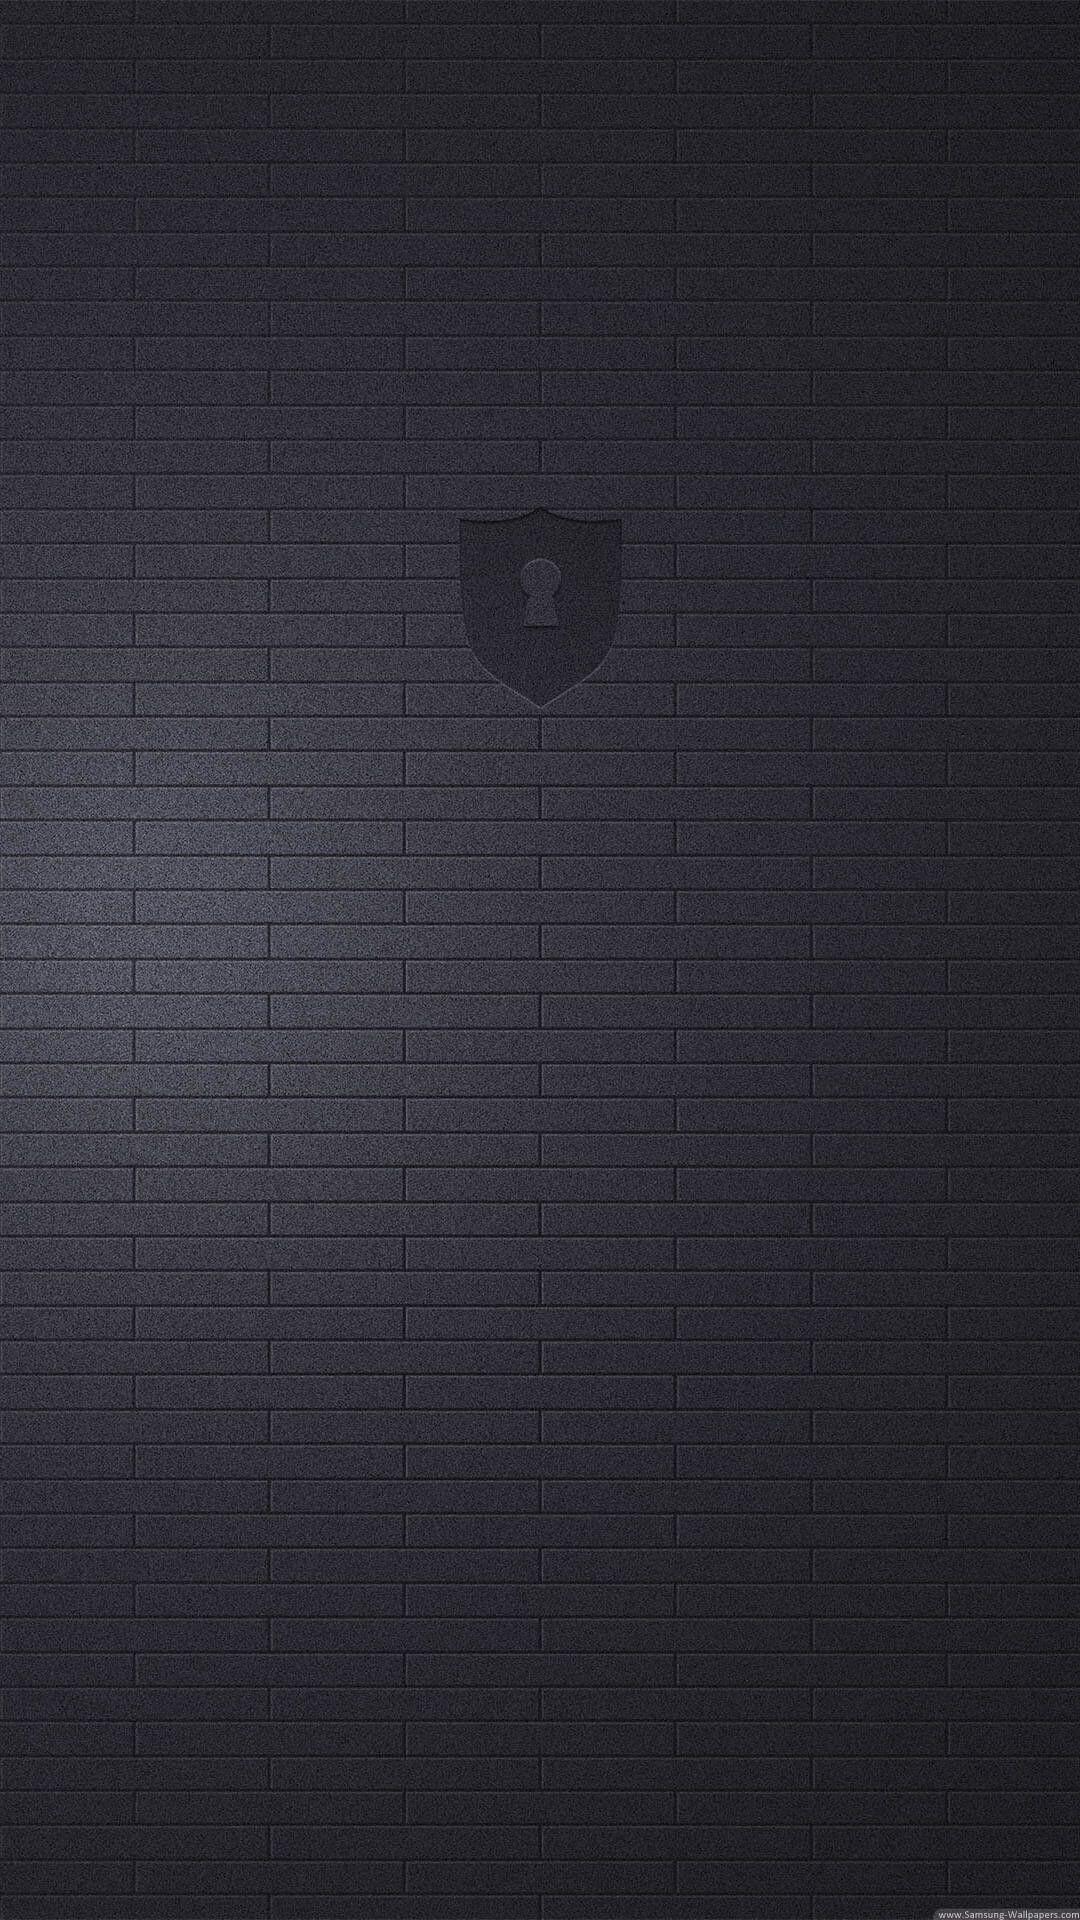  Solid  Black  Wallpapers  Top Free Solid  Black  Backgrounds 